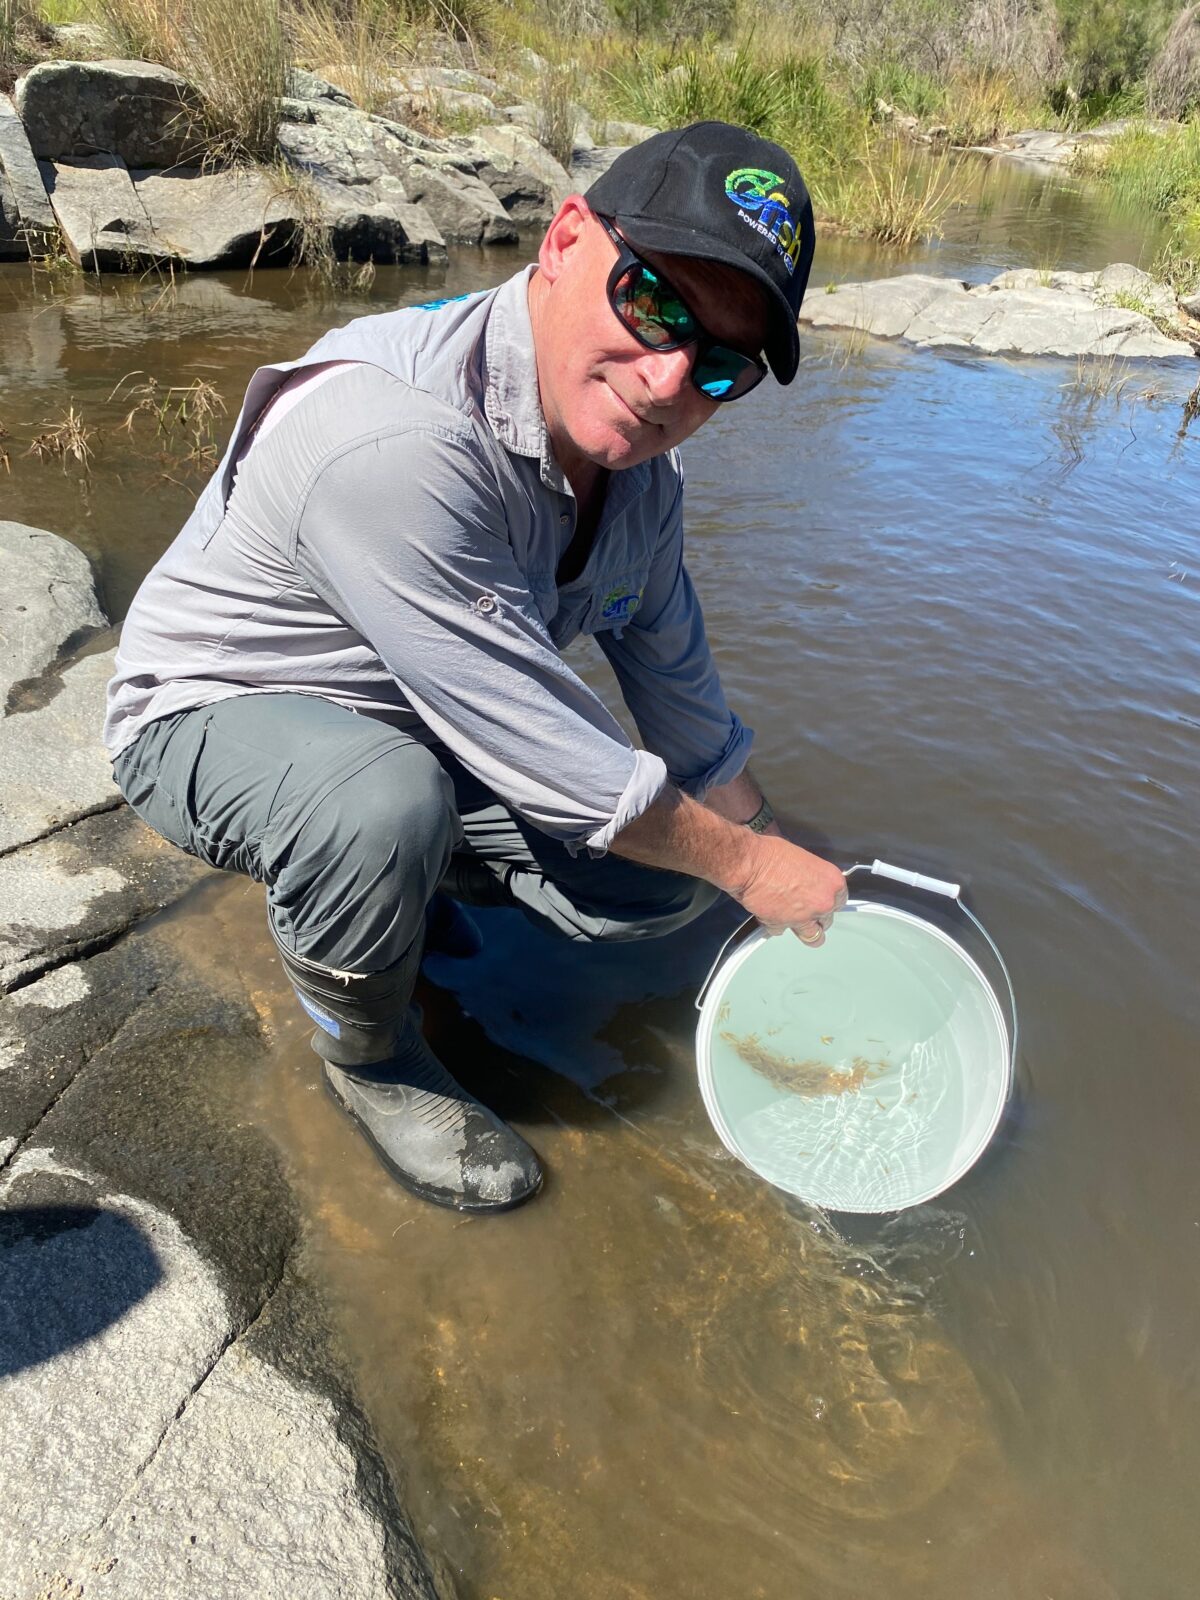 Harry from OzFish releasing some Southern Purple Spotted Gudgeon fingerlings at Tenterfield NSW